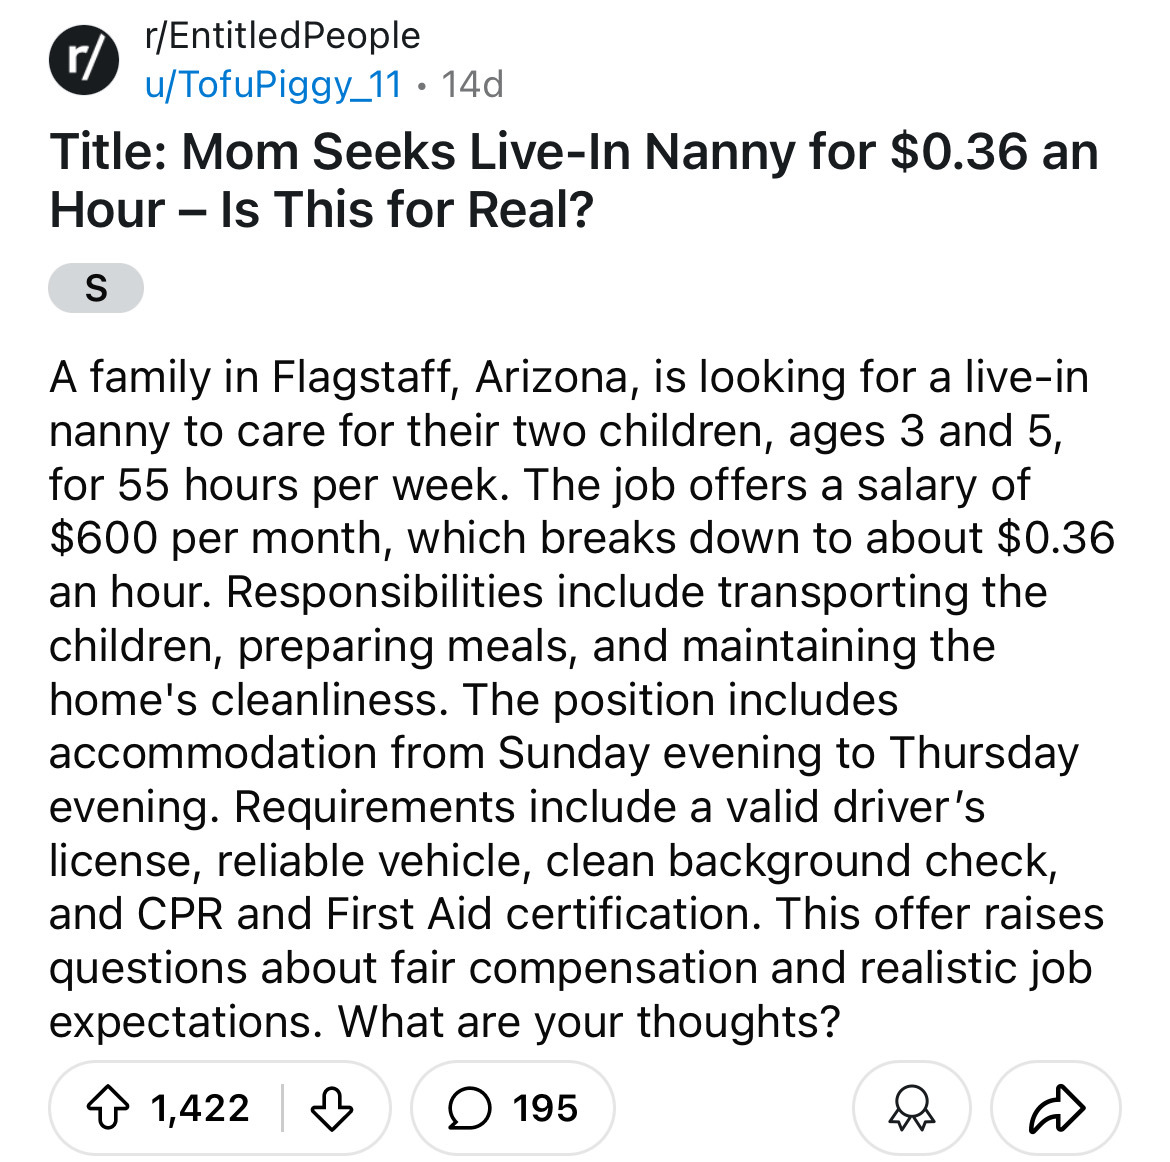 number - r rEntitled People uTofuPiggy_11 14d Title Mom Seeks LiveIn Nanny for $0.36 an Hour Is This for Real? S A family in Flagstaff, Arizona, is looking for a livein nanny to care for their two children, ages 3 and 5, for 55 hours per week. The job off